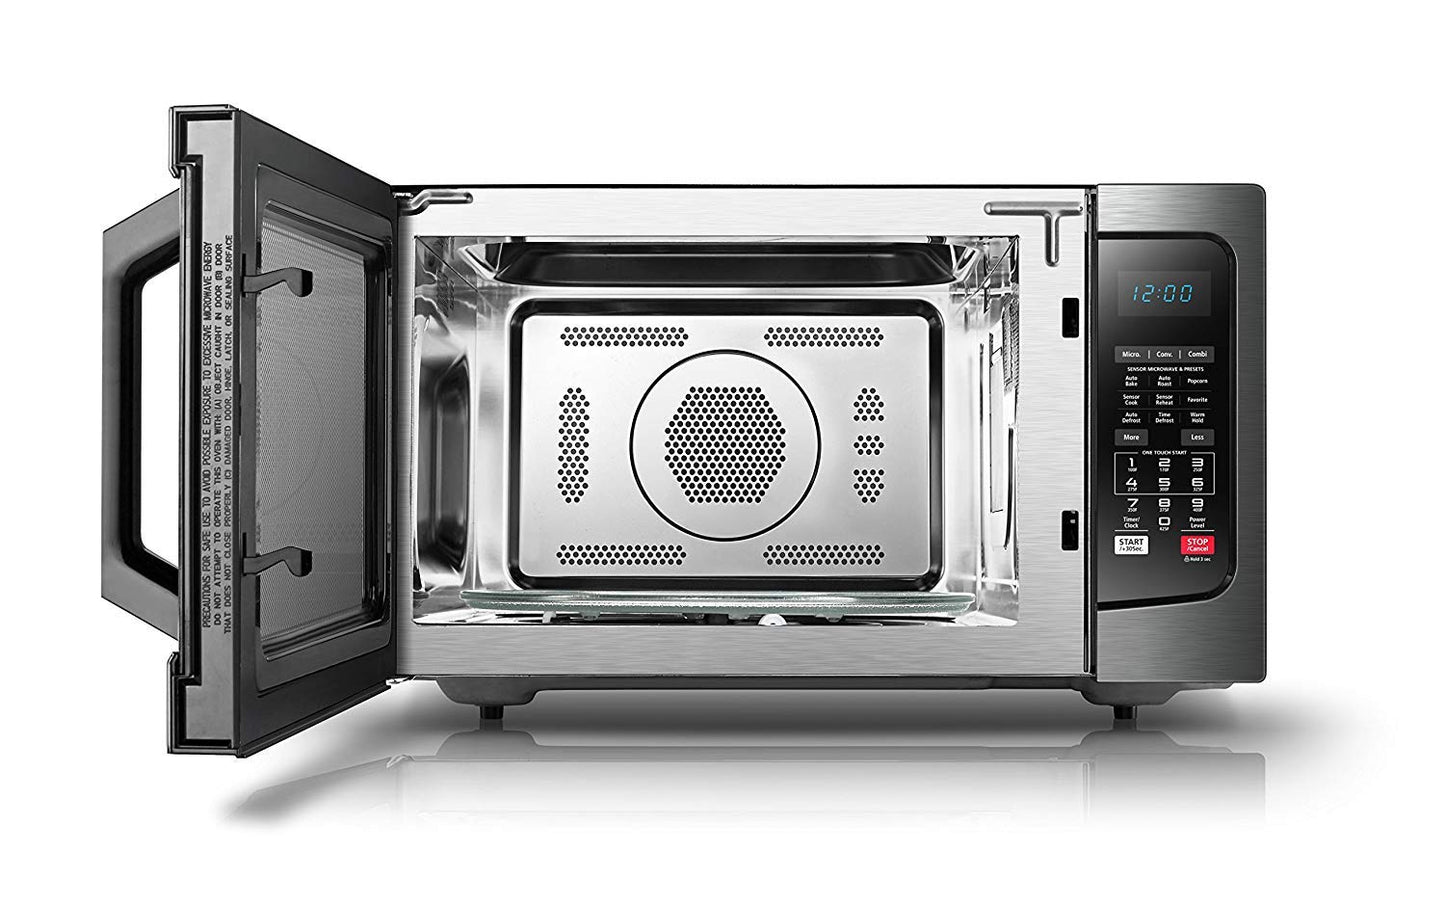 Toshiba EC042A5C-BS Microwave Oven with Convection Function, Smart Sensor, Easy-to-clean Stainless Steel Interior and ECO Mode, 1.5 cu. ft. , 1000W, Black Stainless Steel